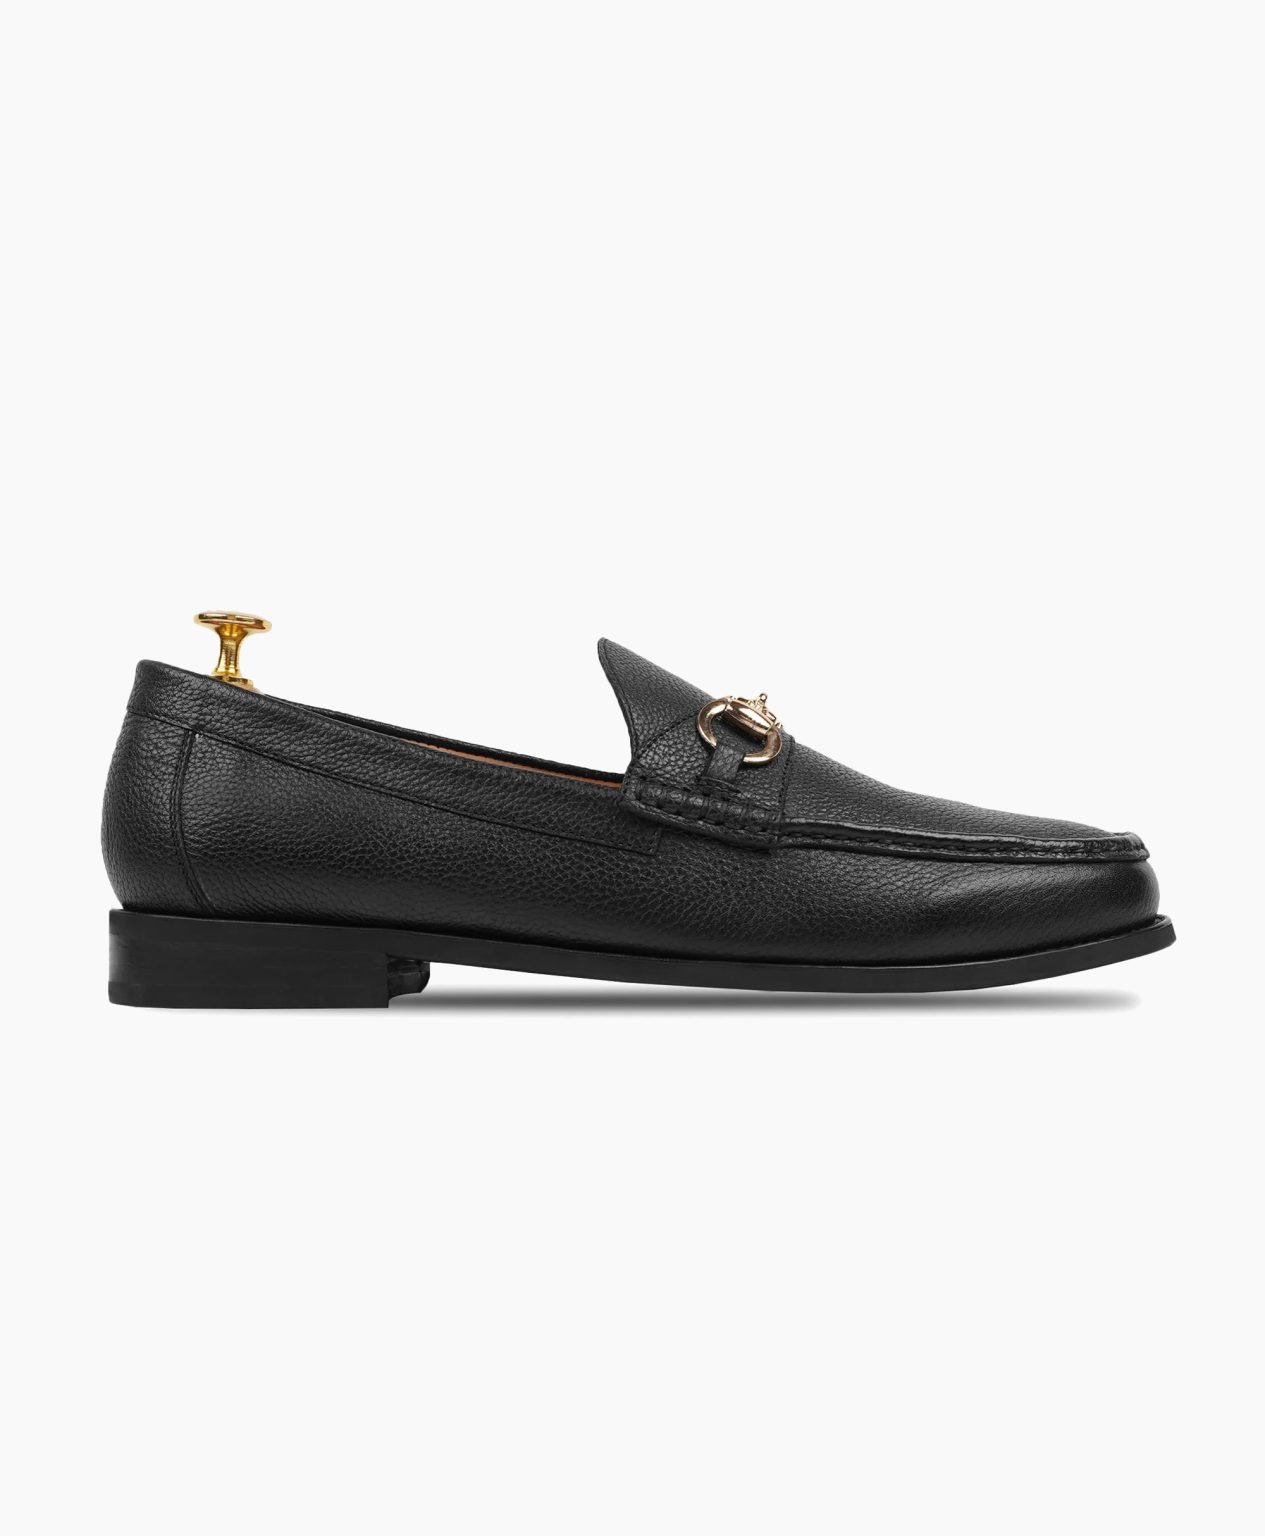 repton-black-leather-loafers-image201